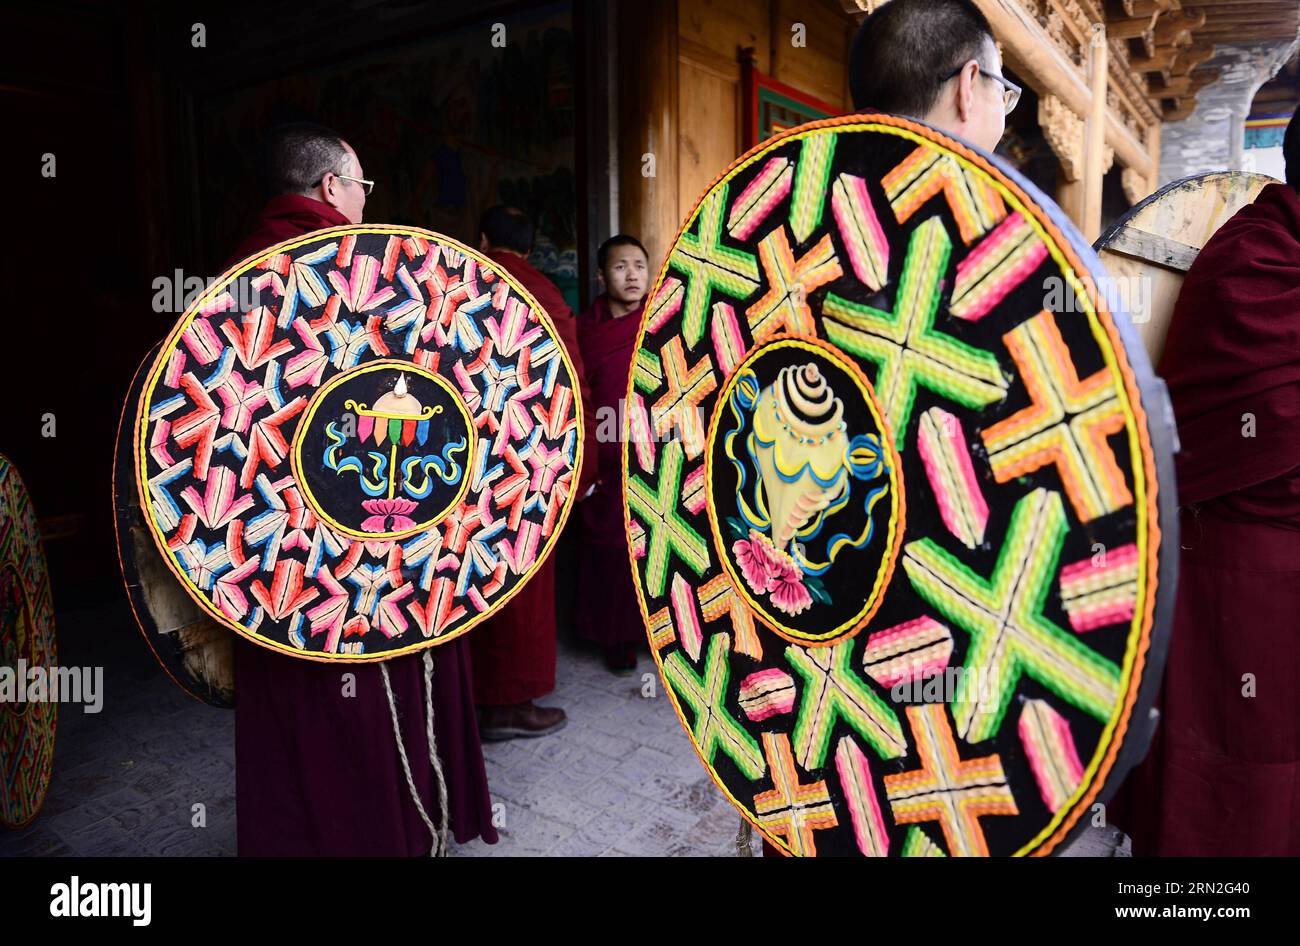 (150305) -- XINING, March 5, 2015 -- Monks carry ghee flower artworks at Taer Monastery in Xining, northwest China s Qinghai Province, March 5, 2015. Ghee flower exhibitions are held in Taer Monastery in Qinghai Province and Labrang Monastery in Gansu Province, both presitigious Tibetan Buddhist monasteries, to celebrate the Lantern Festival on March 5. ) (zkr) CHINA-QINGHAI-GANSU-GHEE FLOWER-EXHIBITIONS (CN) ZhangxHongxiang PUBLICATIONxNOTxINxCHN   Xining March 5 2015 Monks Carry Ghee Flower Artworks AT Taer monastery in Xining Northwest China S Qinghai Province March 5 2015 Ghee Flower Exhib Stock Photo